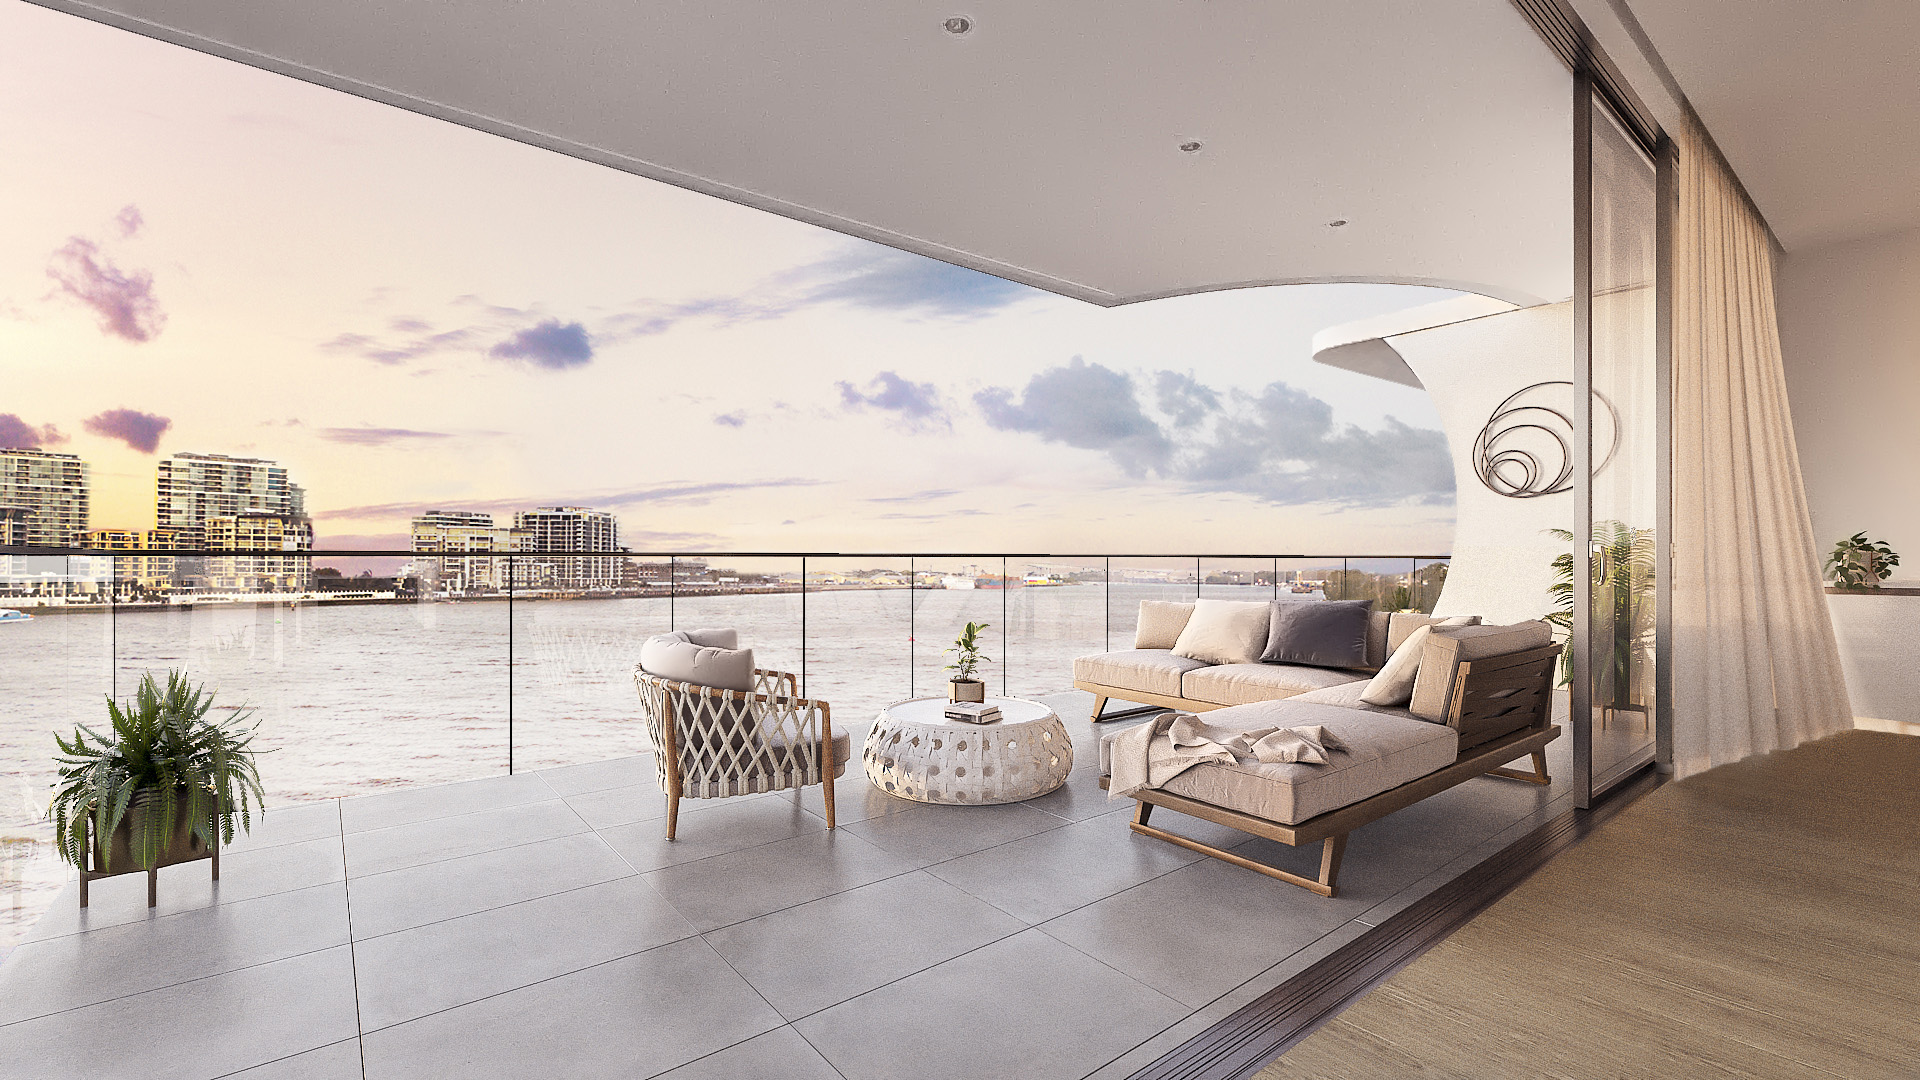 ONE Bulimba Riverfront Apartment and Penthouse balcony